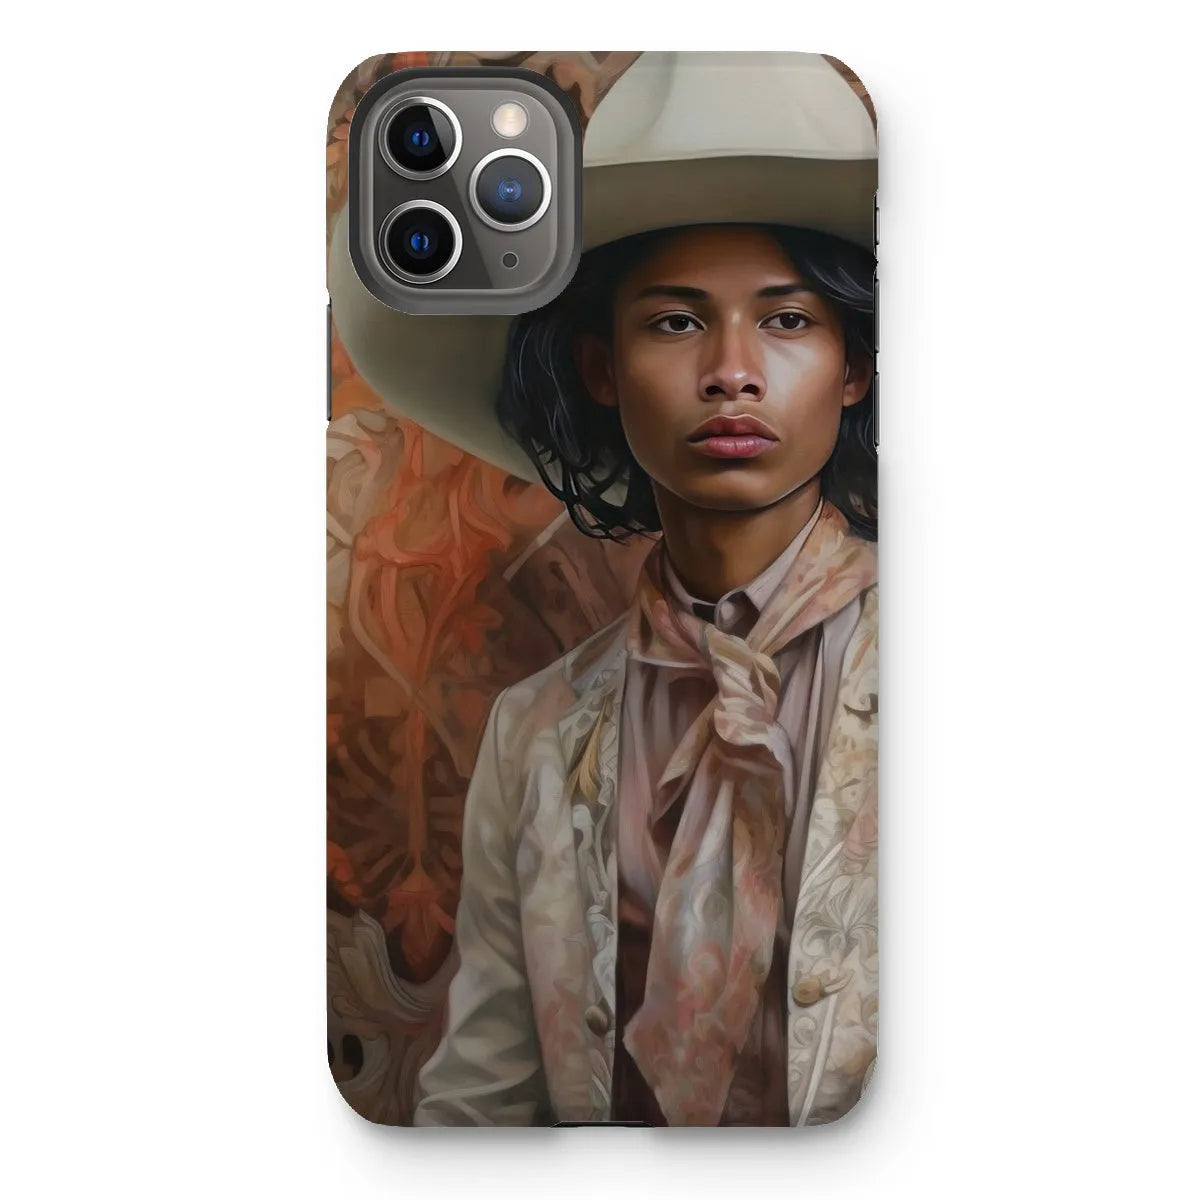 Arjuna The Gay Cowboy - Gay Aesthetic Art Phone Case - Iphone 11 Pro Max / Matte - Mobile Phone Cases - Aesthetic Art